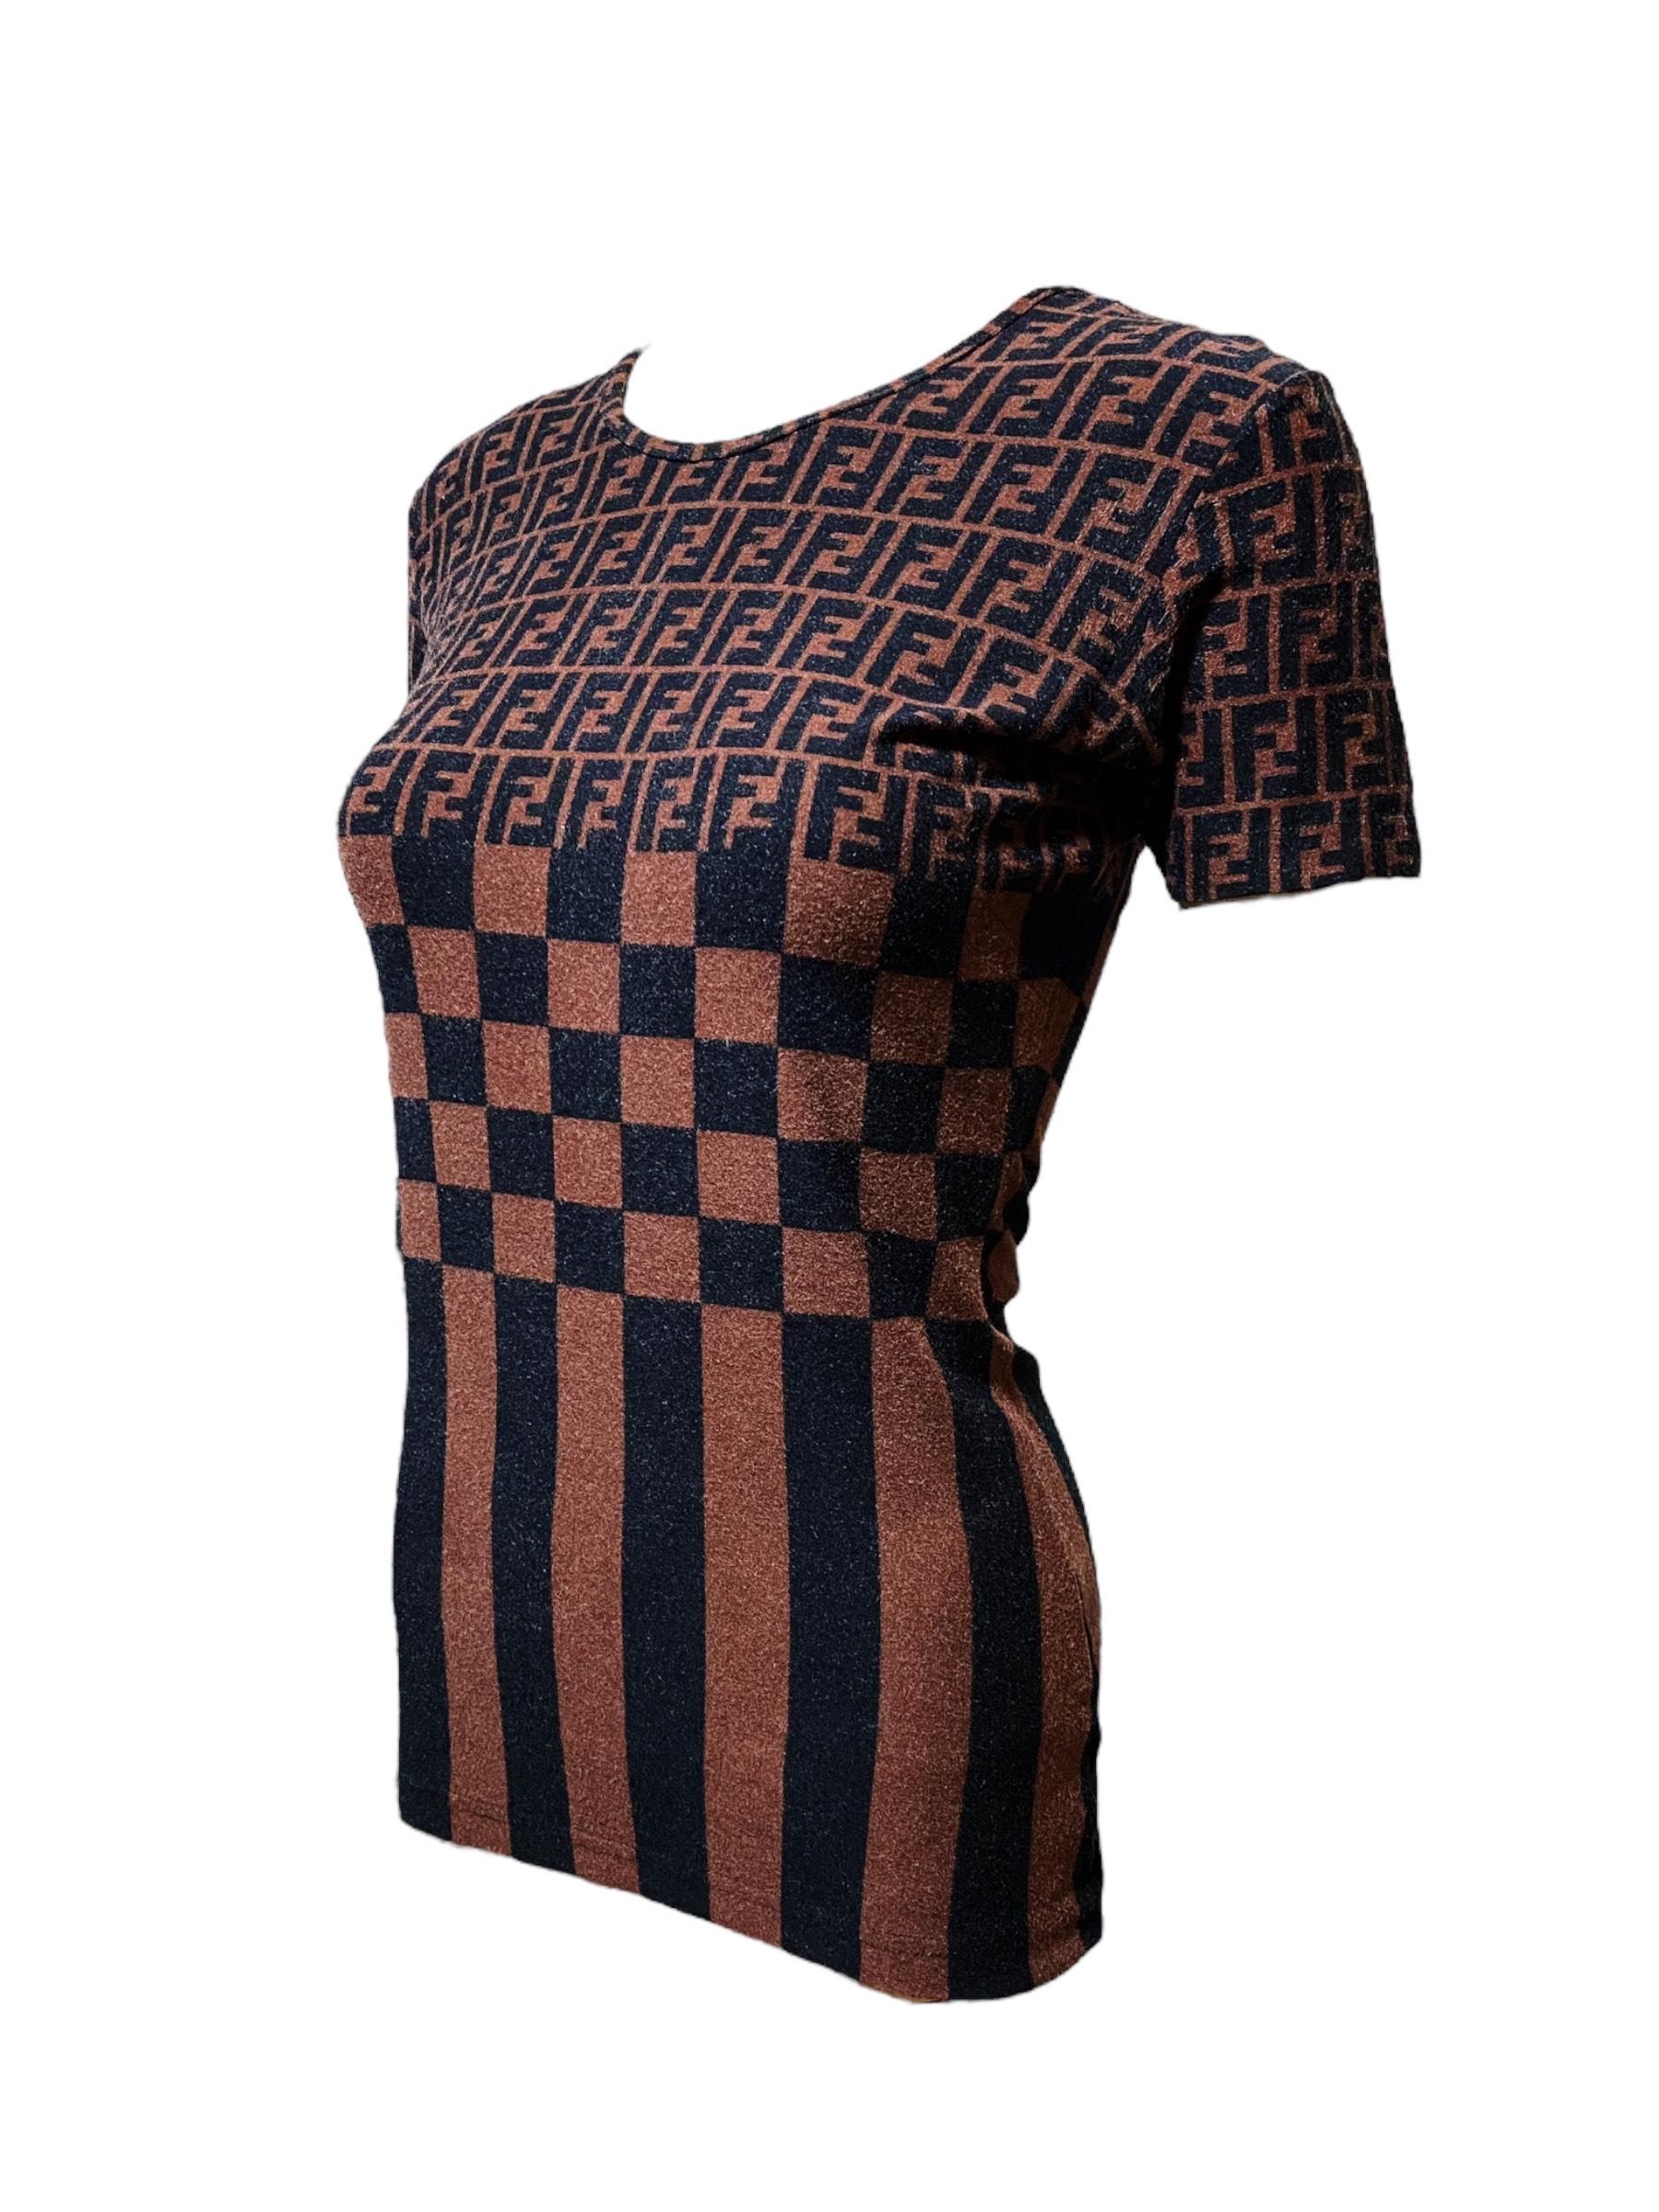 The FF capsule collection. Vintage 90’s Fendi Mare - Zucca Monogram T Shirt. Super soft and stretchy summer shirt. It Features iconic F monogram along with checker and striped print. The collection celebrates something very dear and represents so